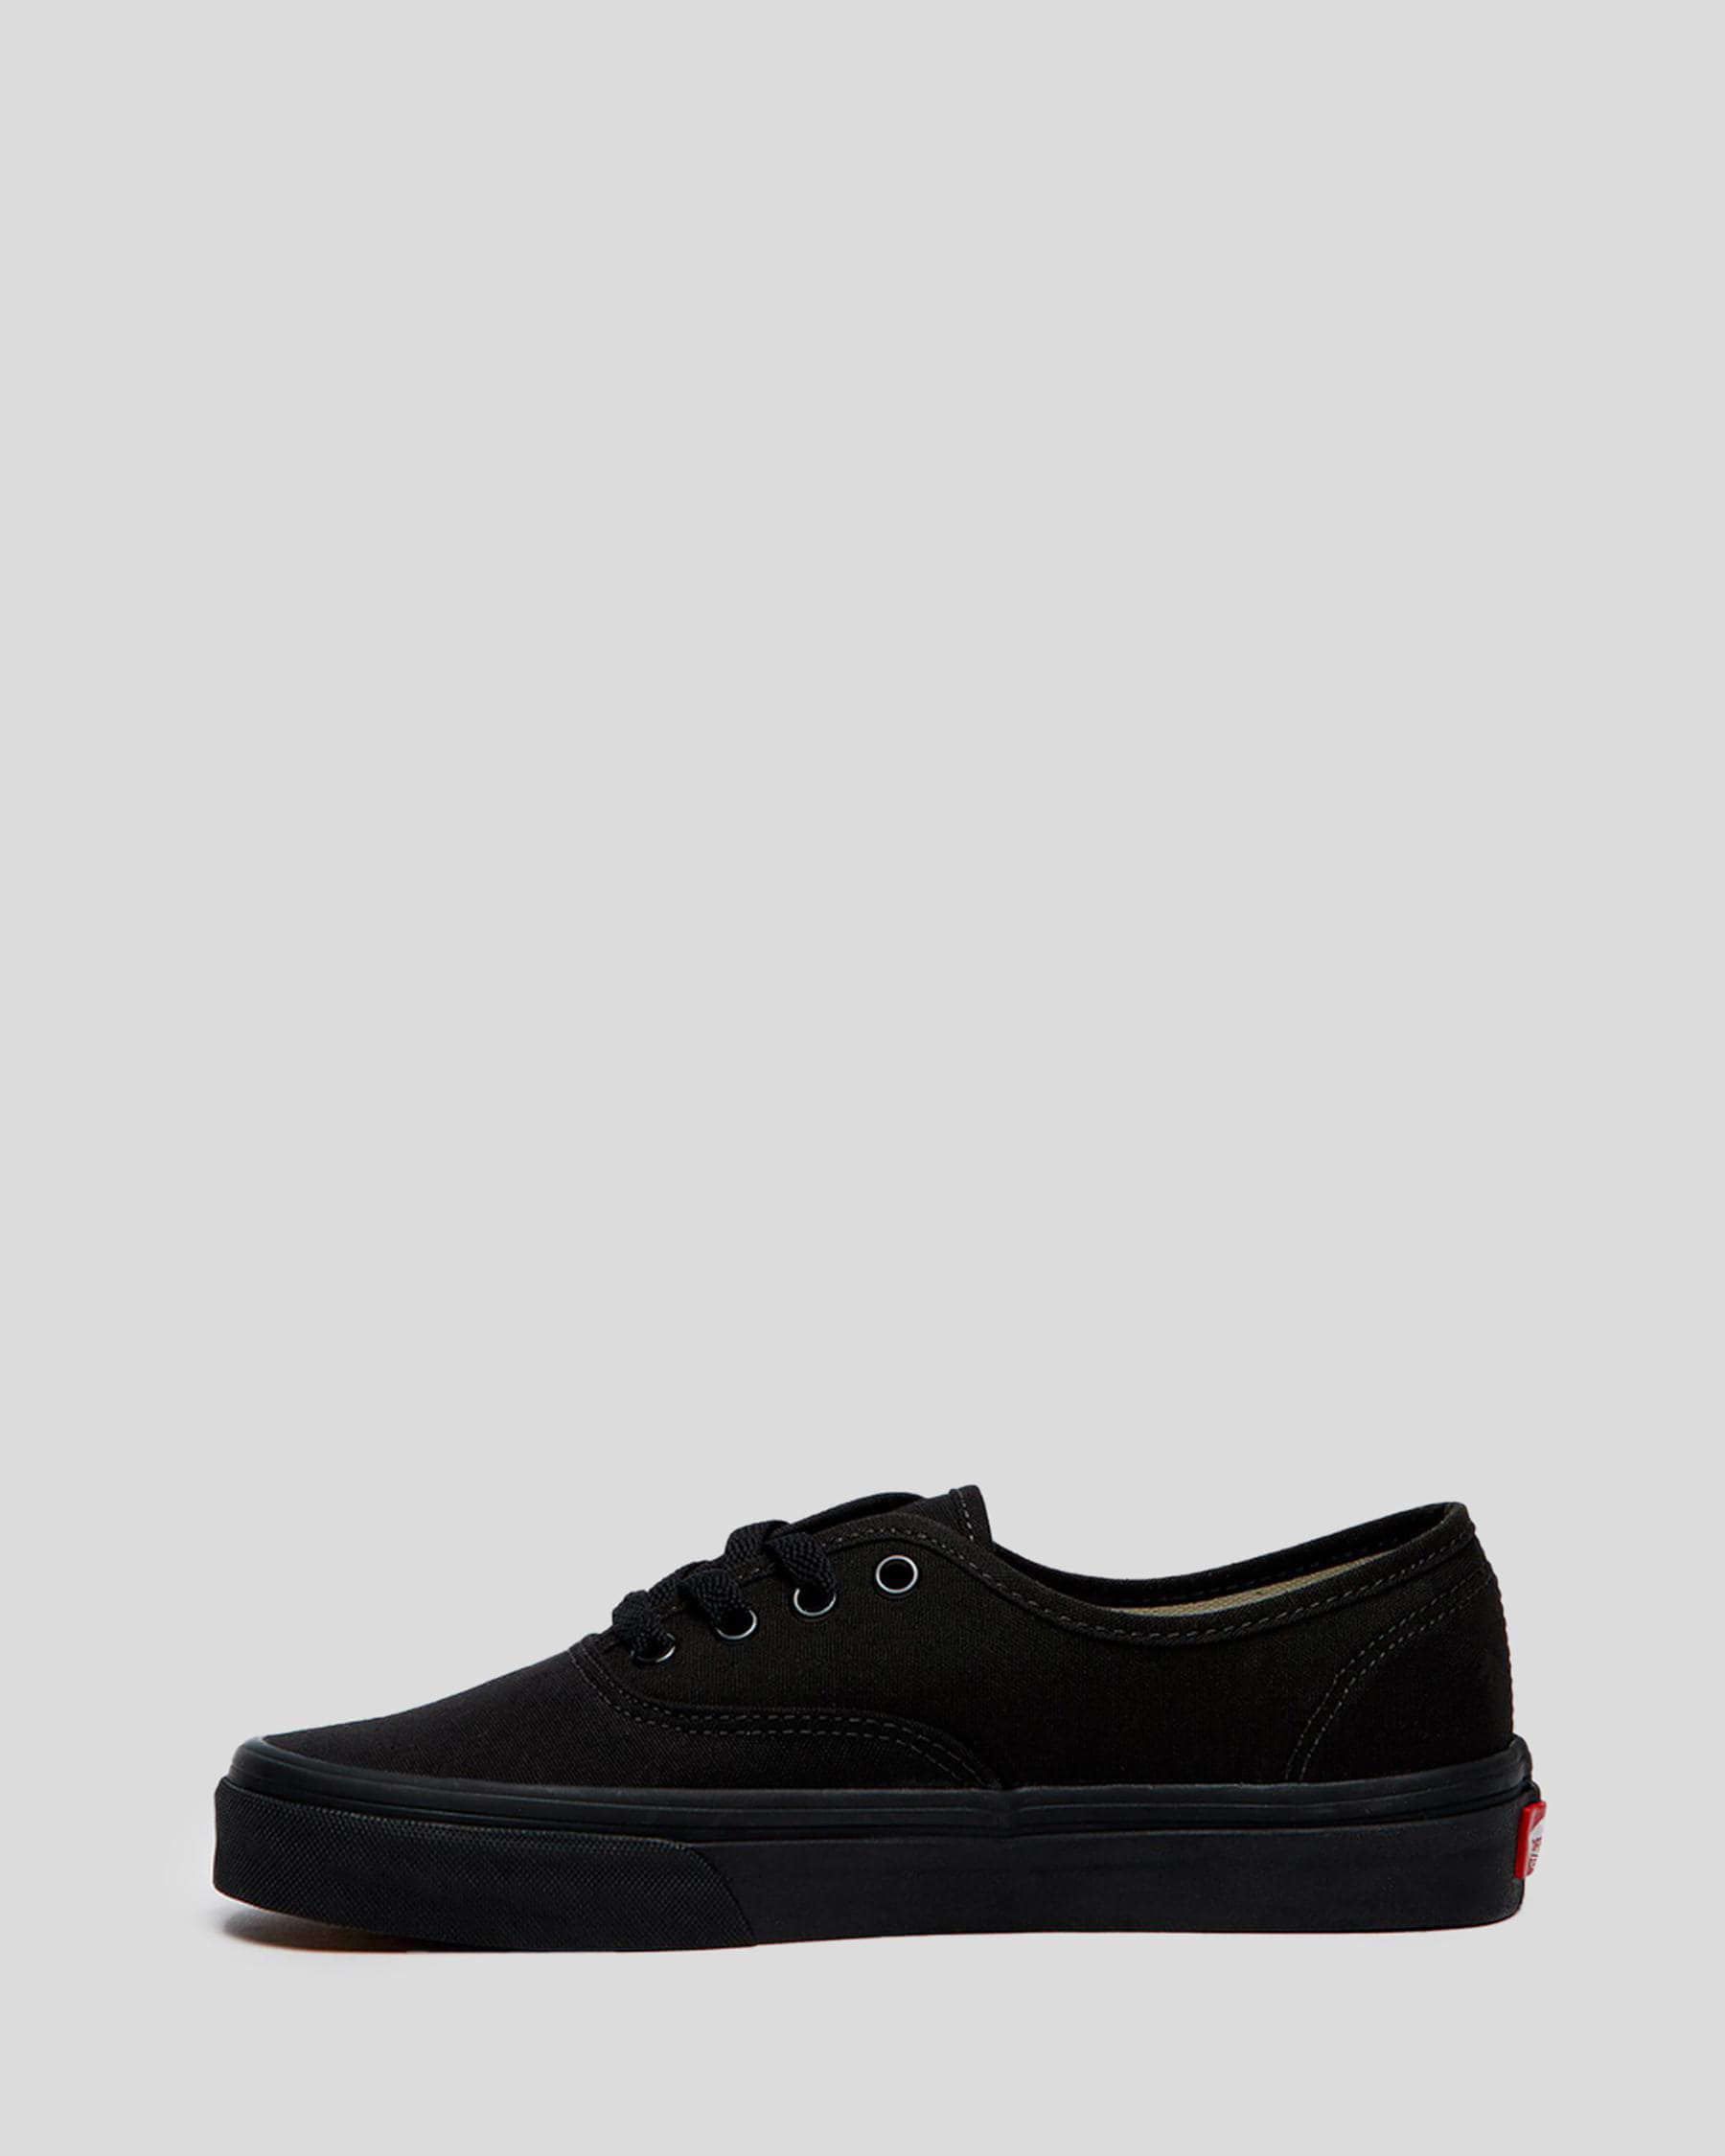 Vans Mens' Authentic Shoes In Black/black - Fast Shipping & Easy ...